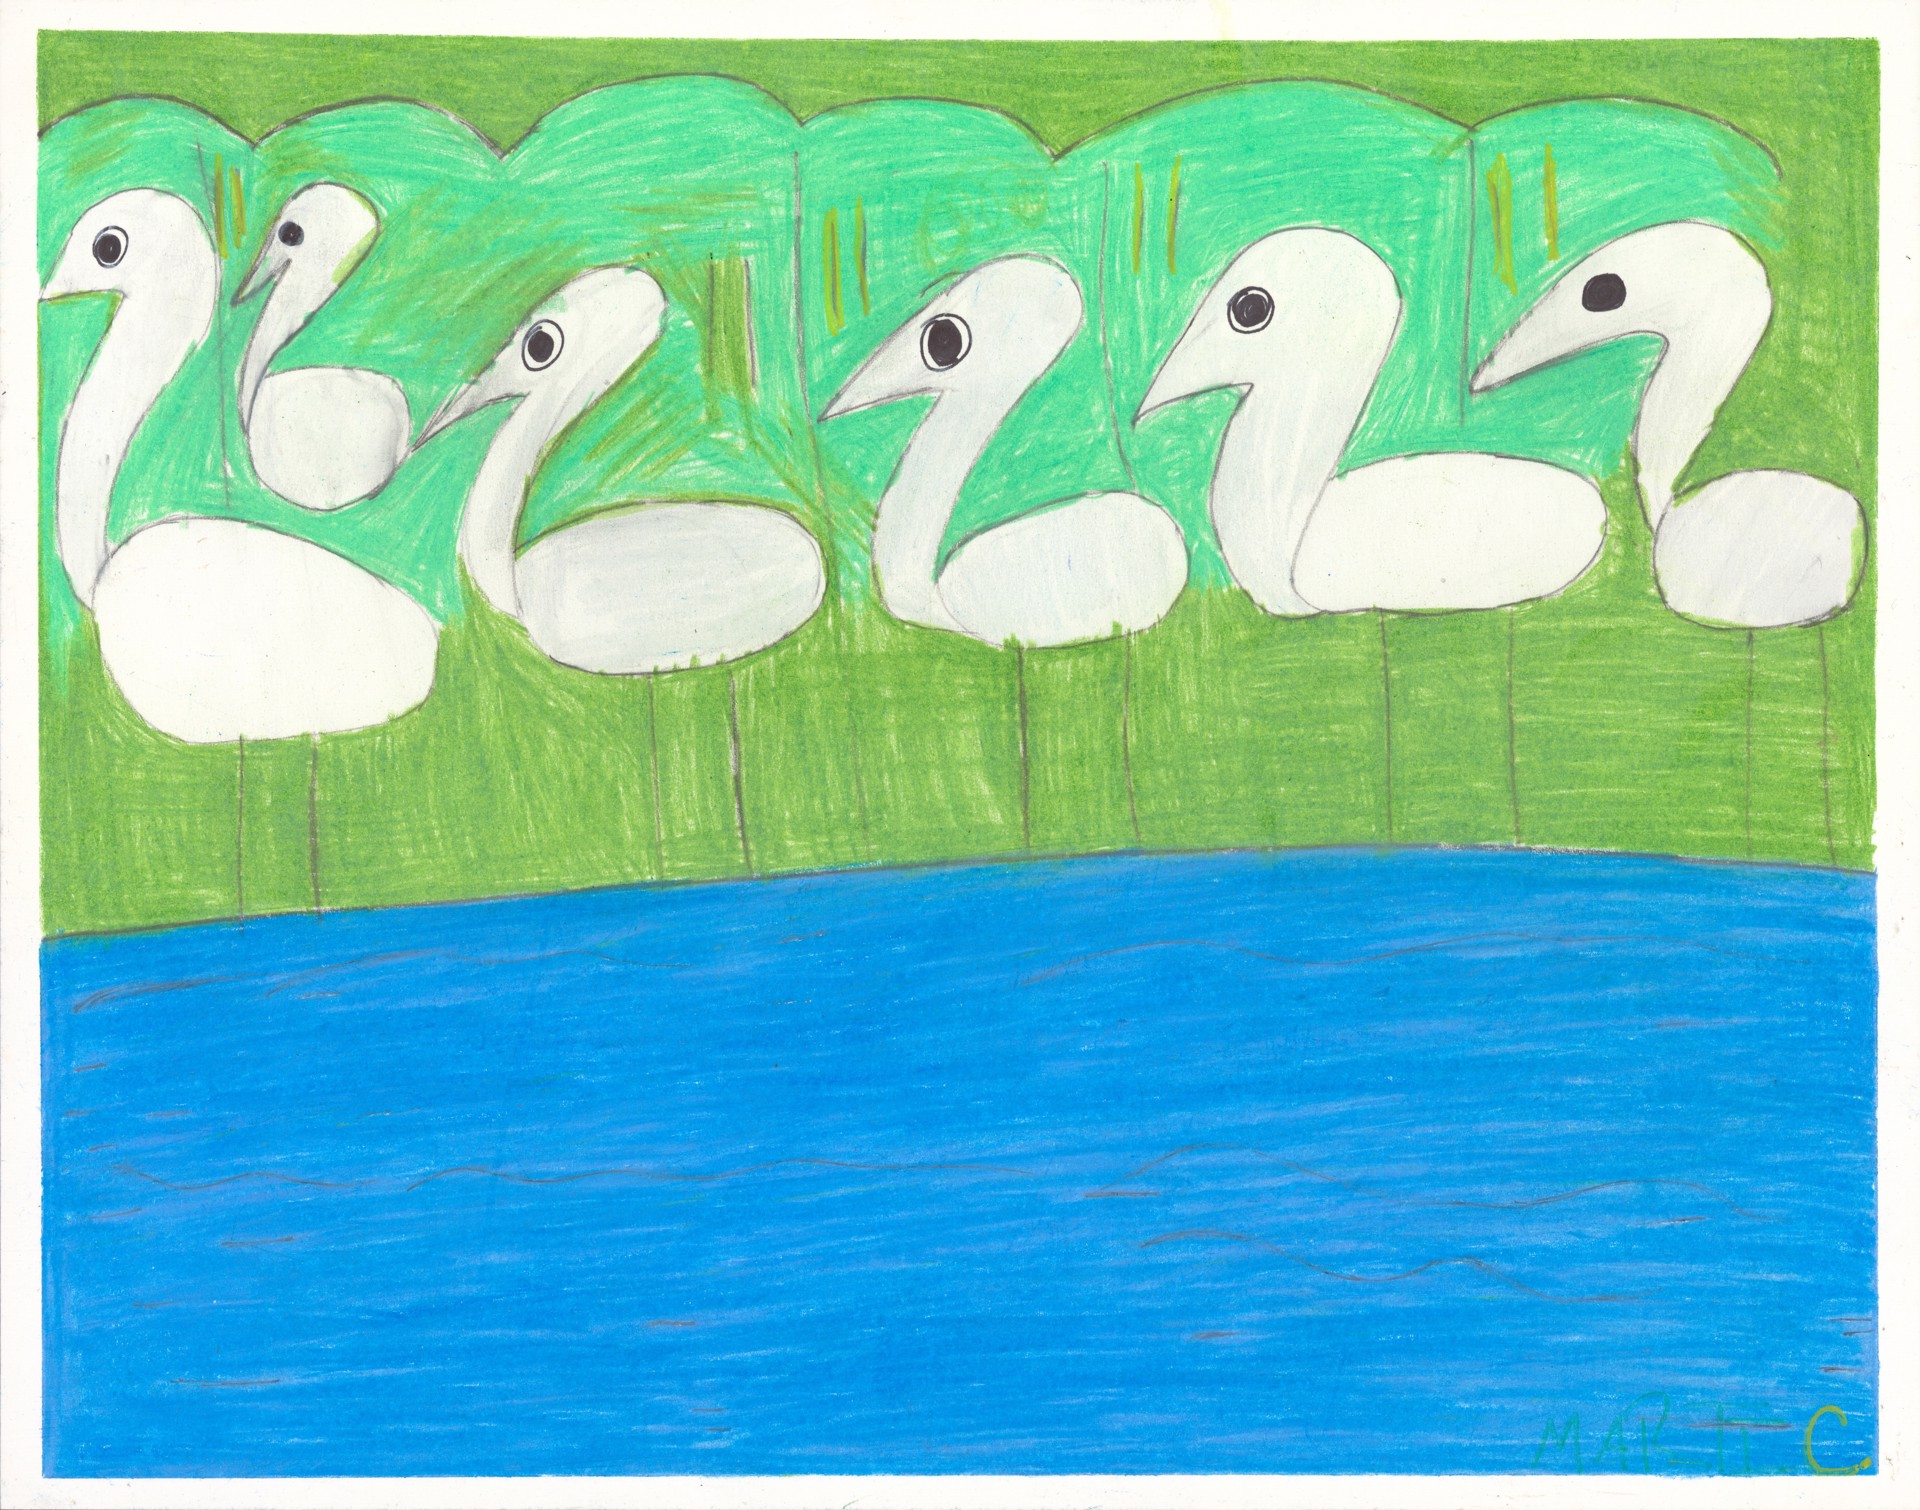 Chincoteague Geese by Marti Clark